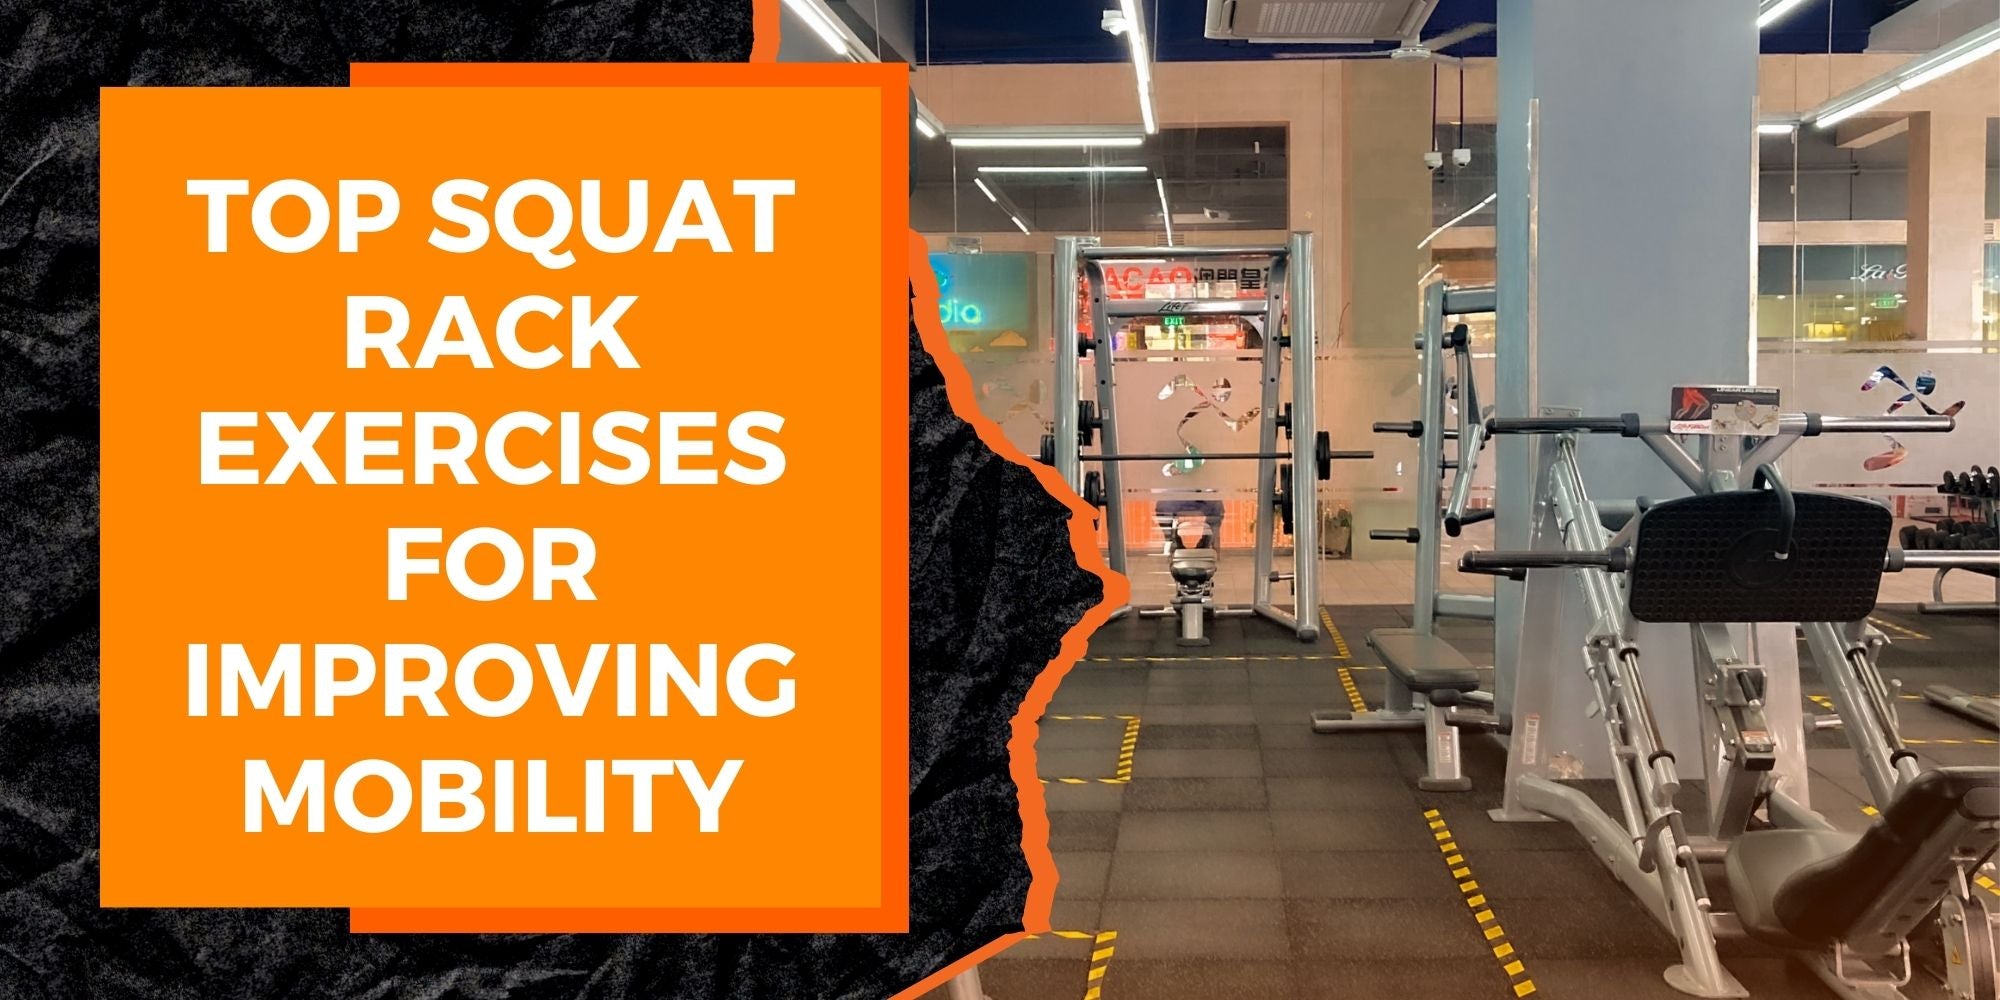 Top Squat Rack Exercises for Improving Mobility